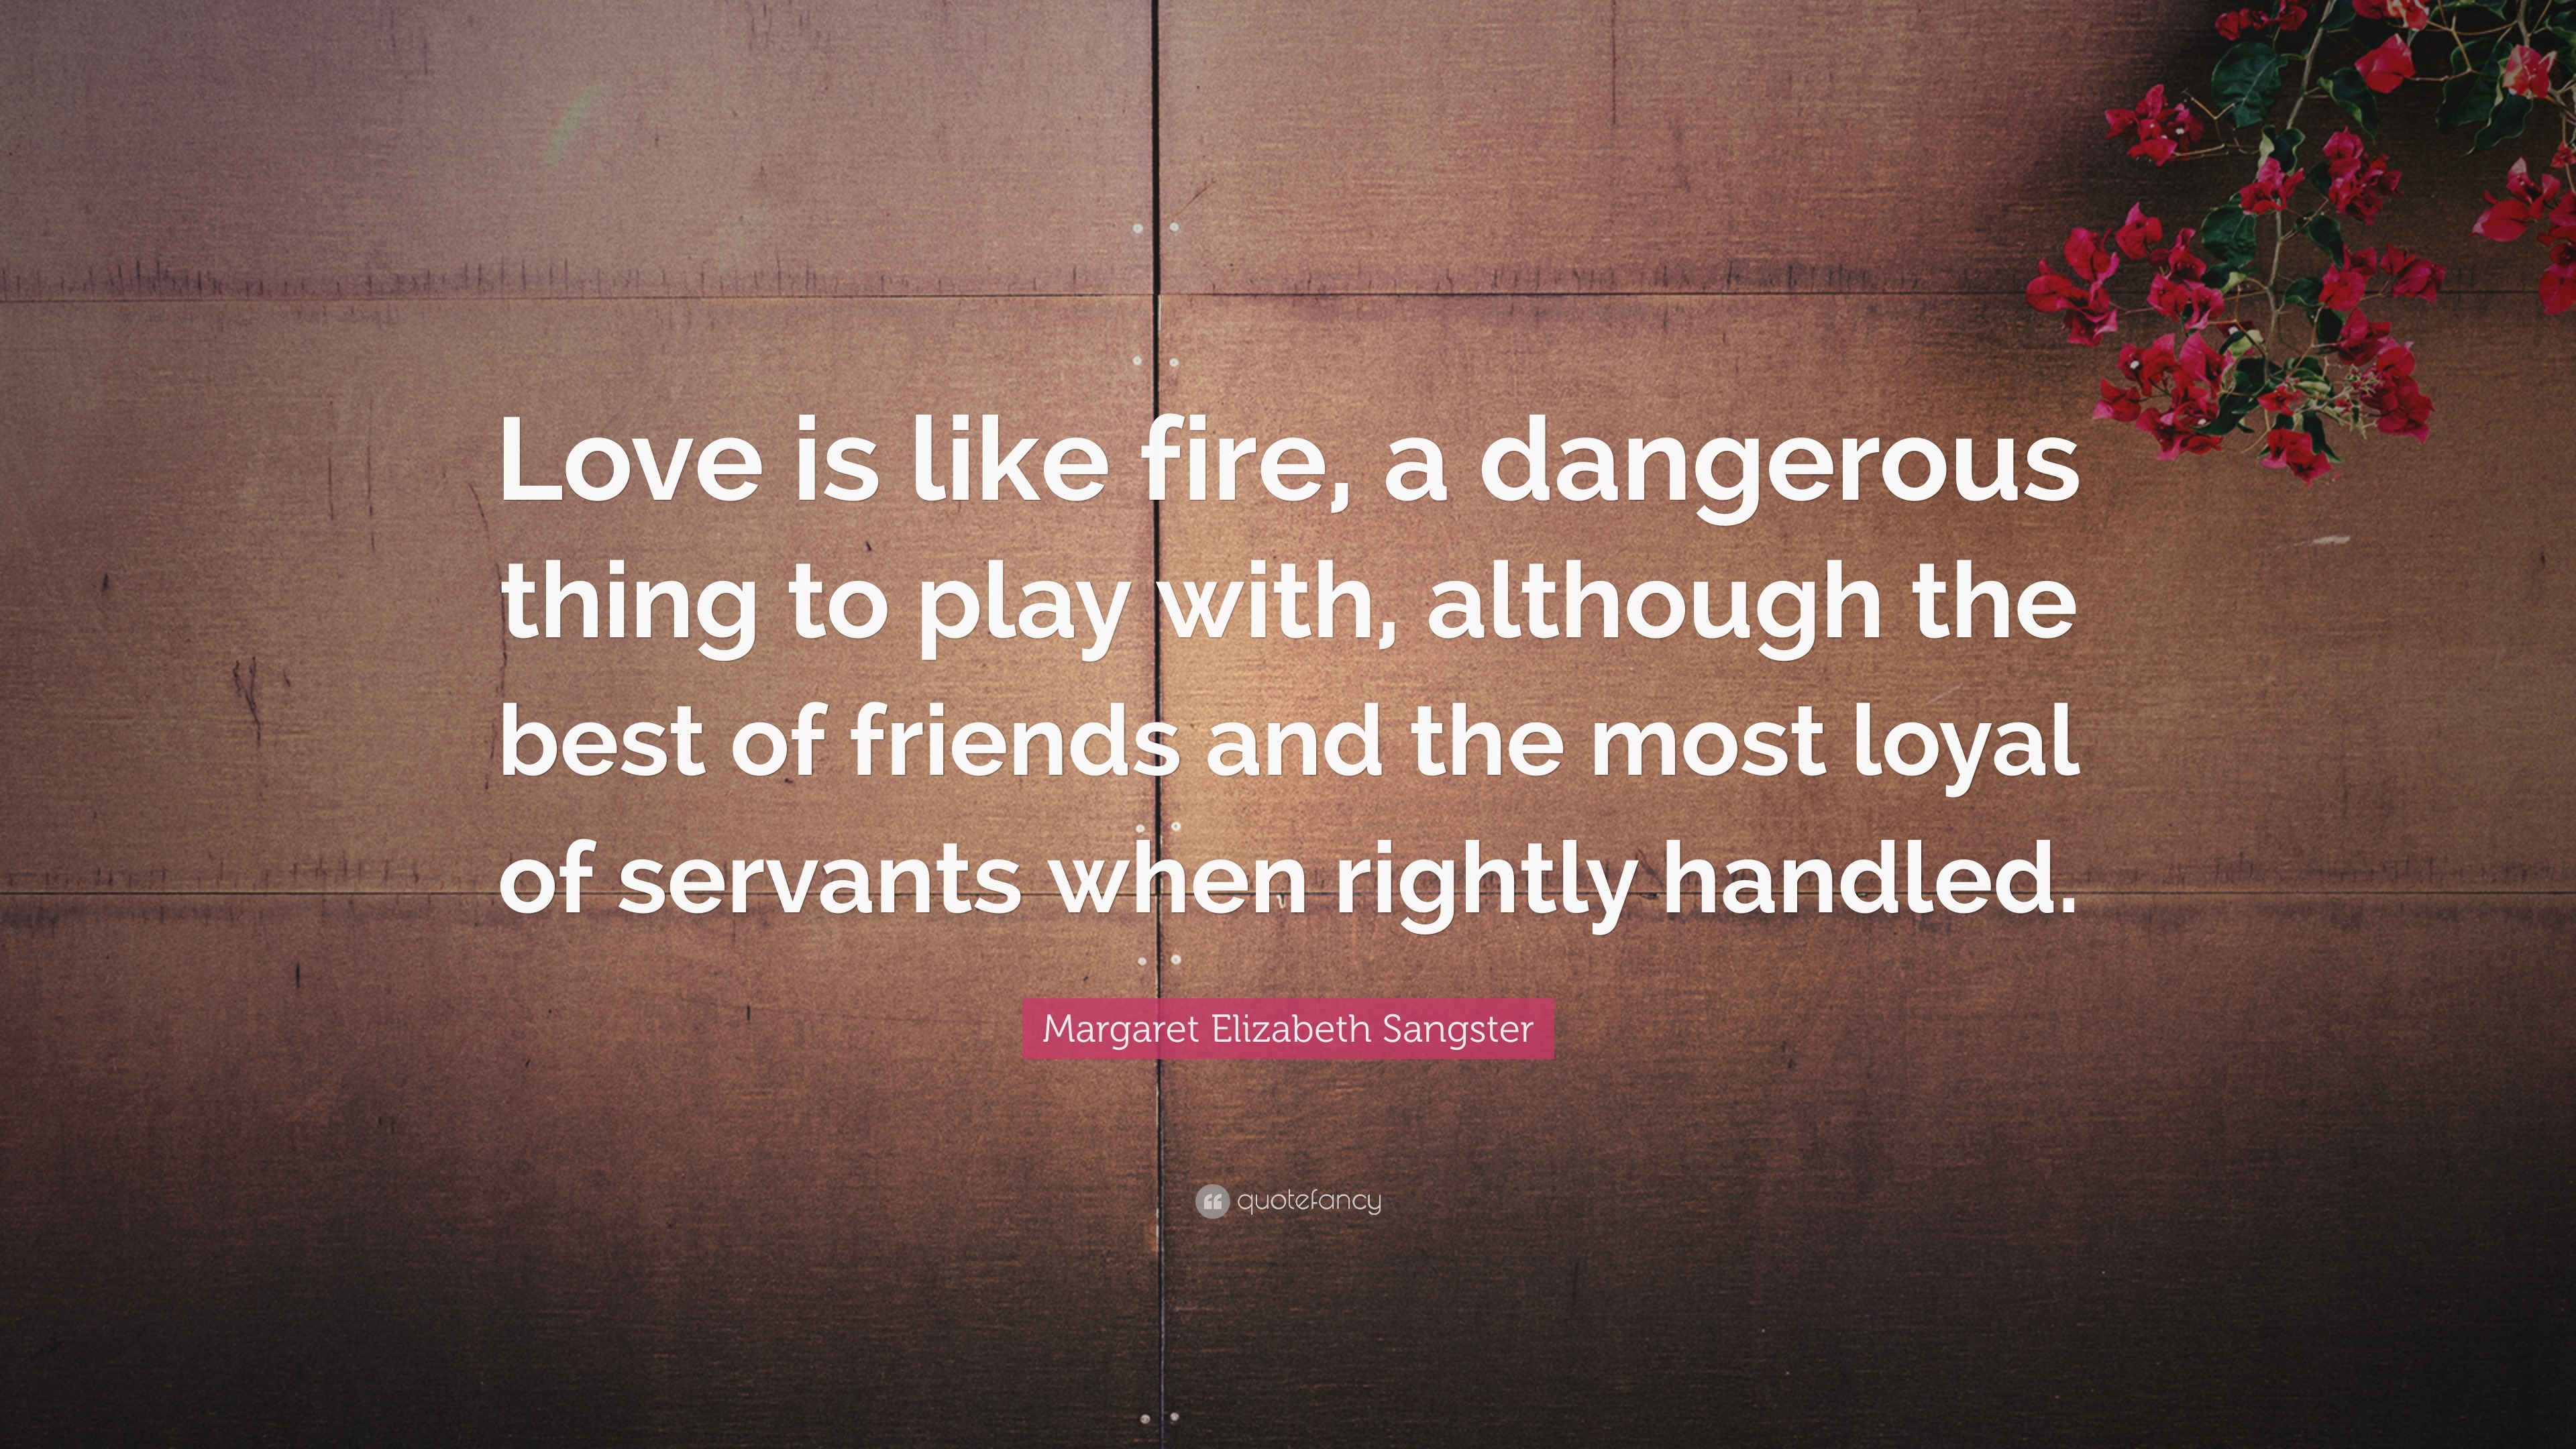 Margaret Elizabeth Sangster Quote “Love is like fire a dangerous thing to play